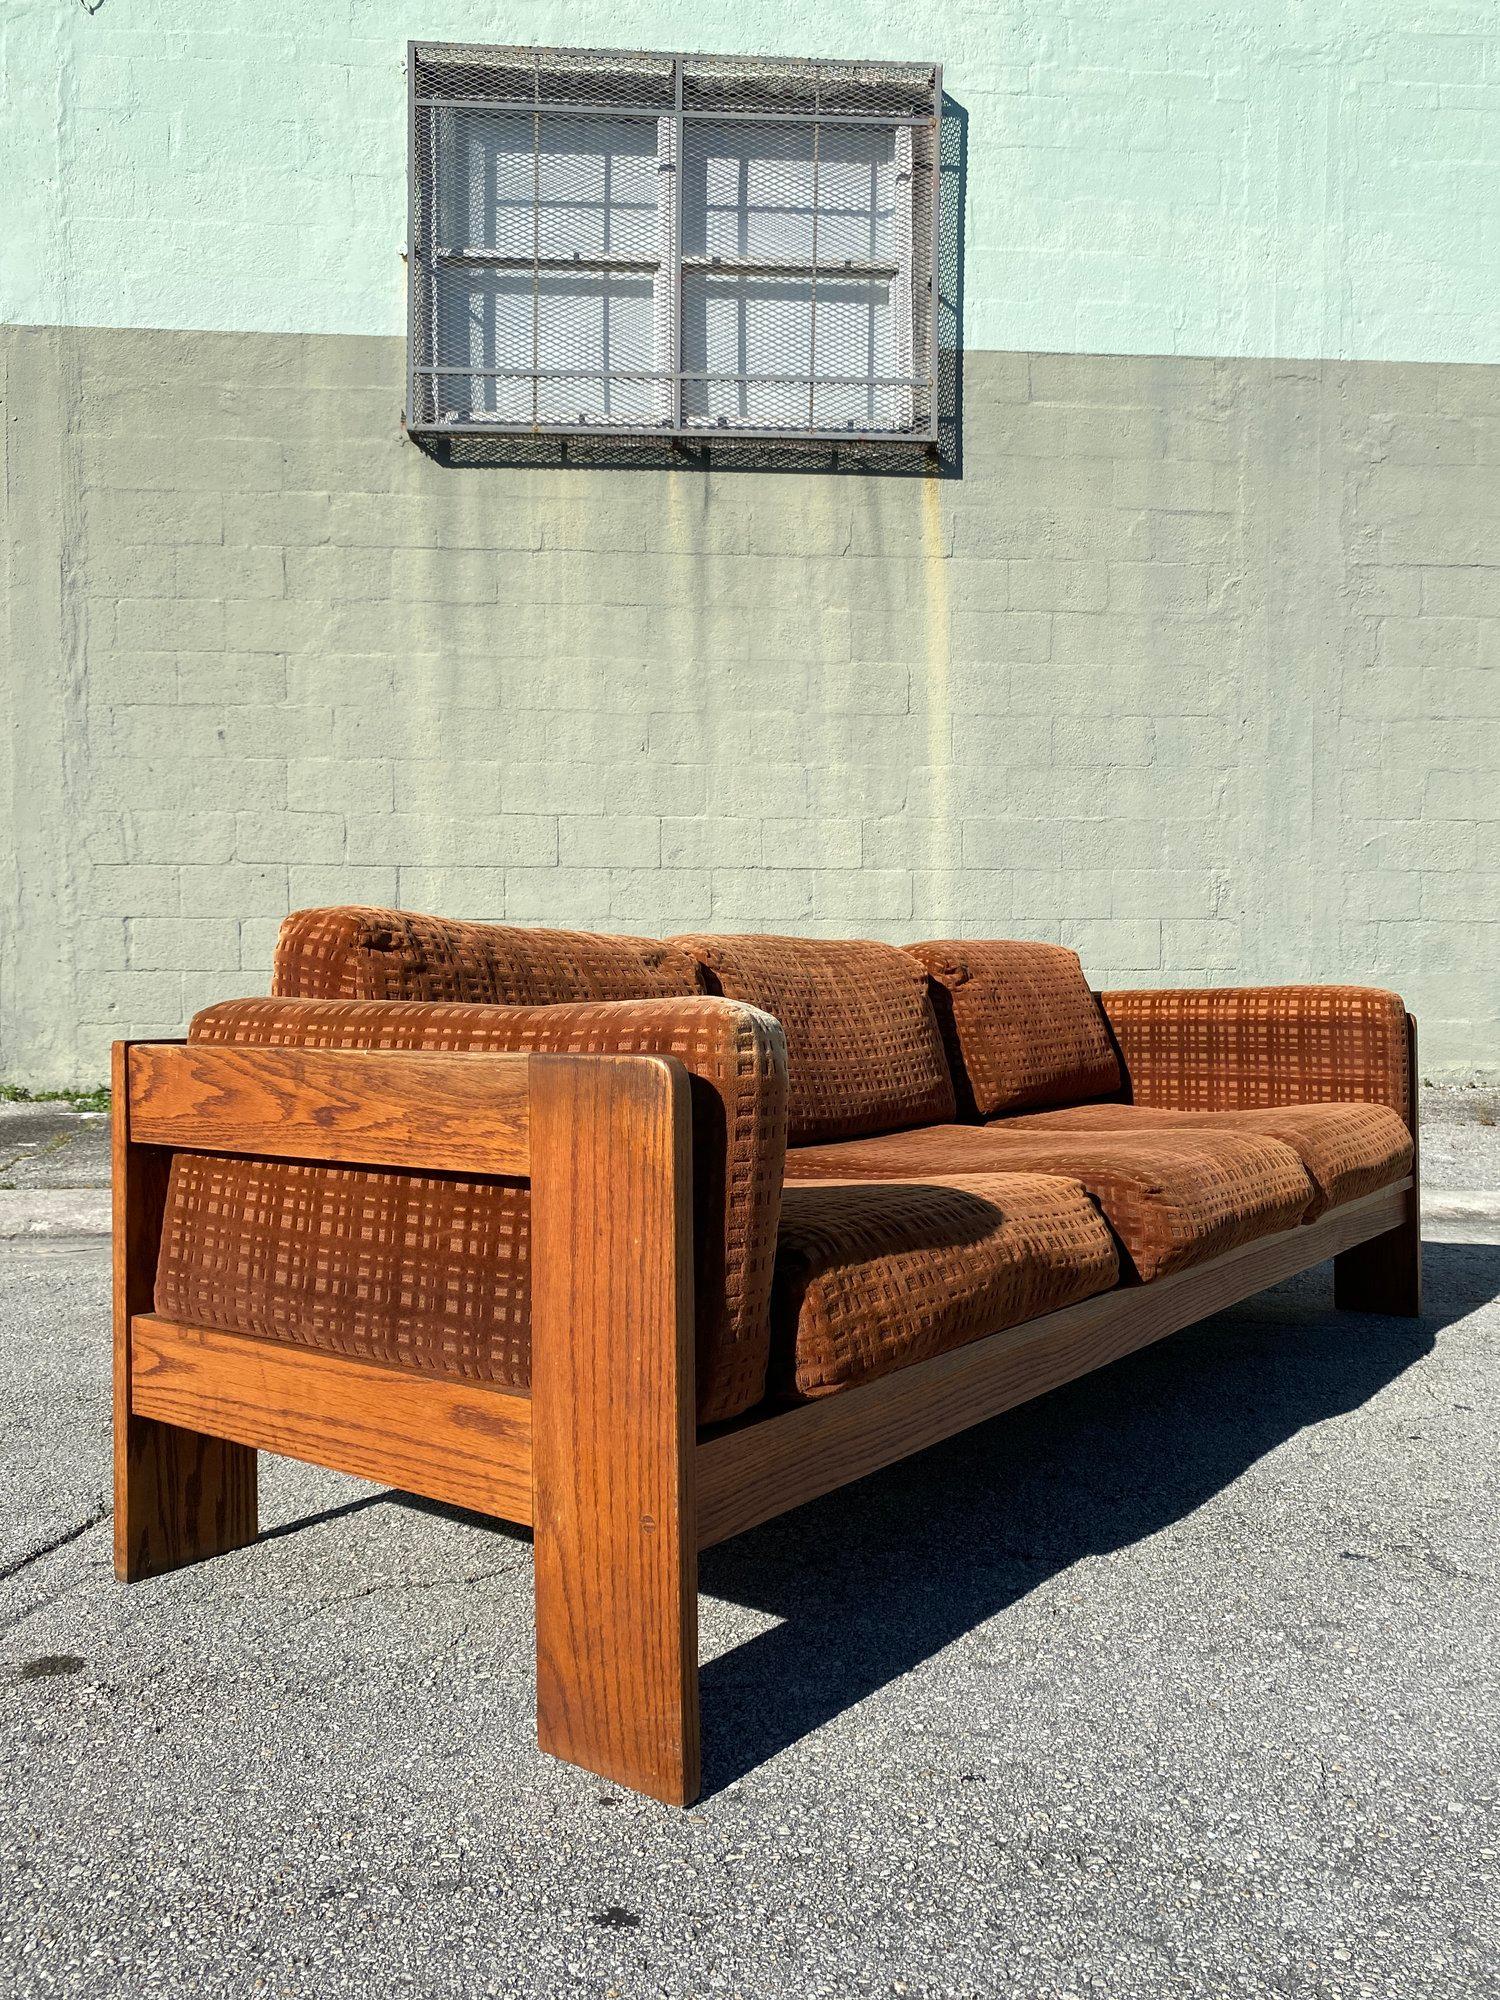 Italian mid century three seater sofa in the style of Tobia Scarpa for Knoll, circa 1960.

Beautiful architectural style design classic in the tradition of Le Corbusier. Sofa is in good original condition, with all the straps in the frame